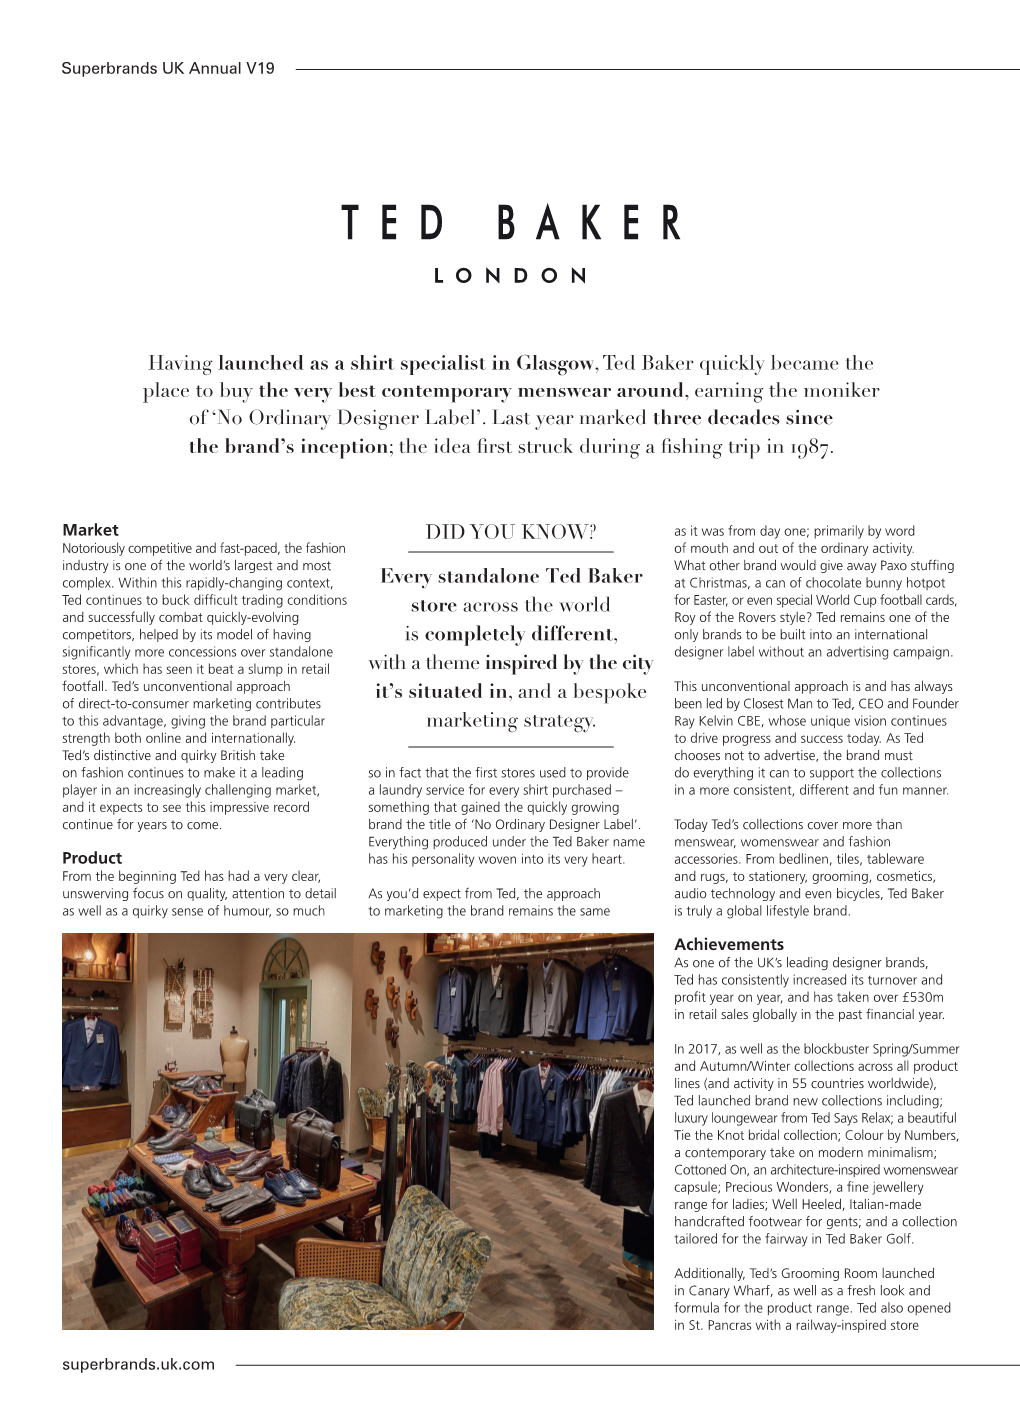 Having Launched As a Shirt Specialist in Glasgow, Ted Baker Quickly